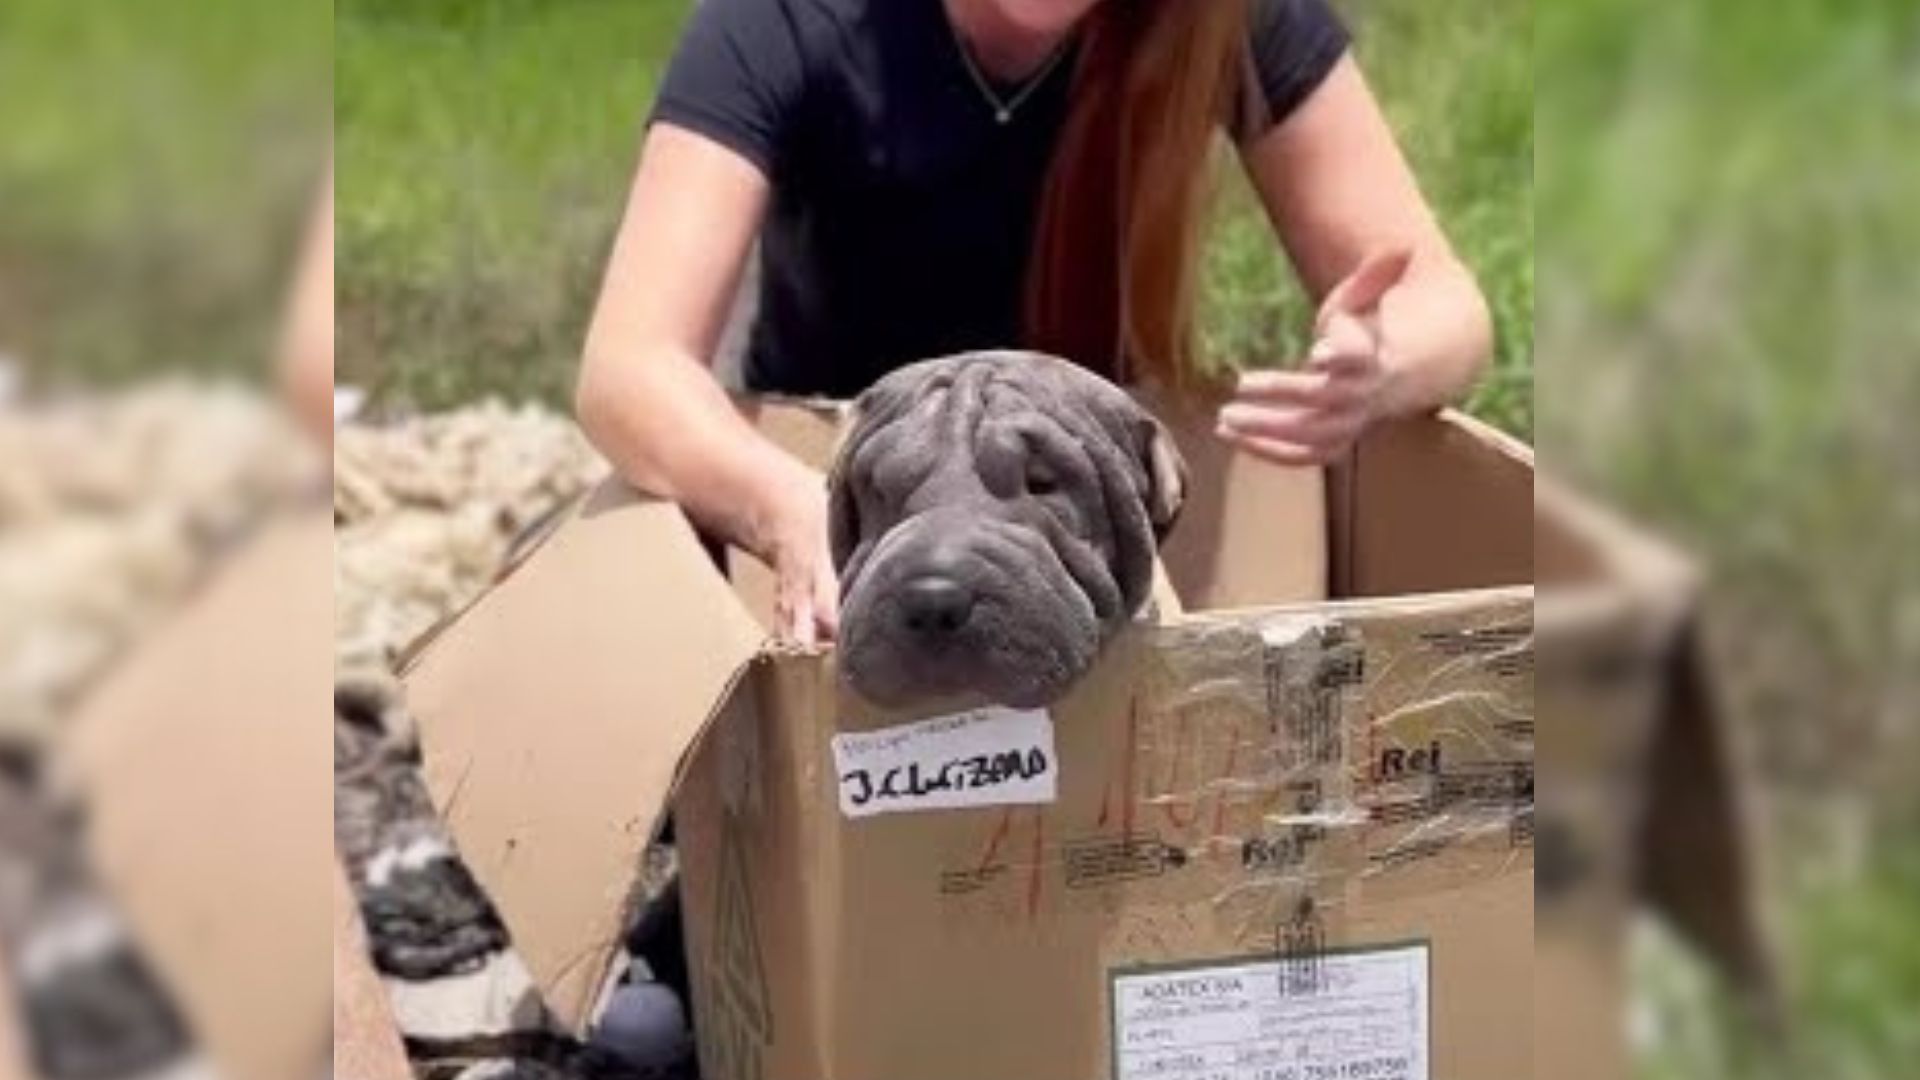 Blind Mama Dog Dumped In A Landfill Refuses To Leave A Box Hoping To Be Reunited With Her Babies